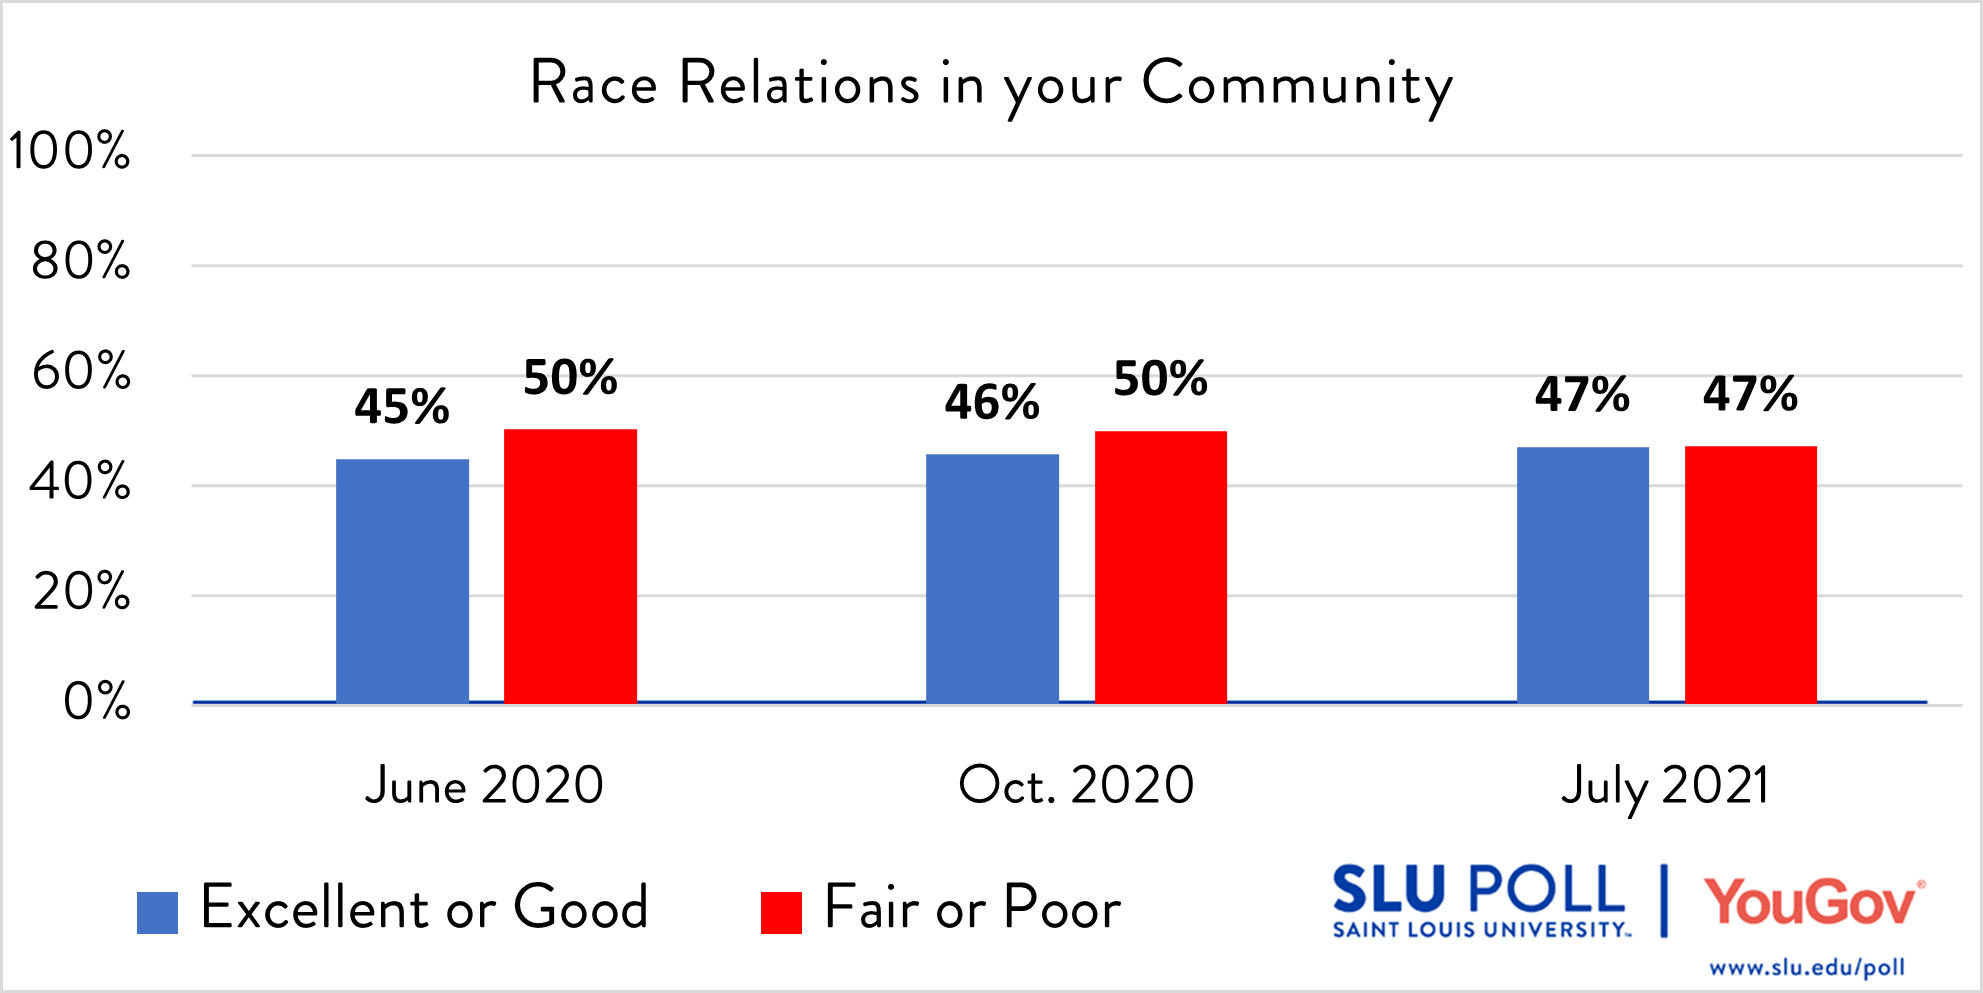 How would you rate the following…Race relations in your community? - Excellent: 12% - Good: 35% - Fair: 26% - Poor: 21% - Not sure: 6%